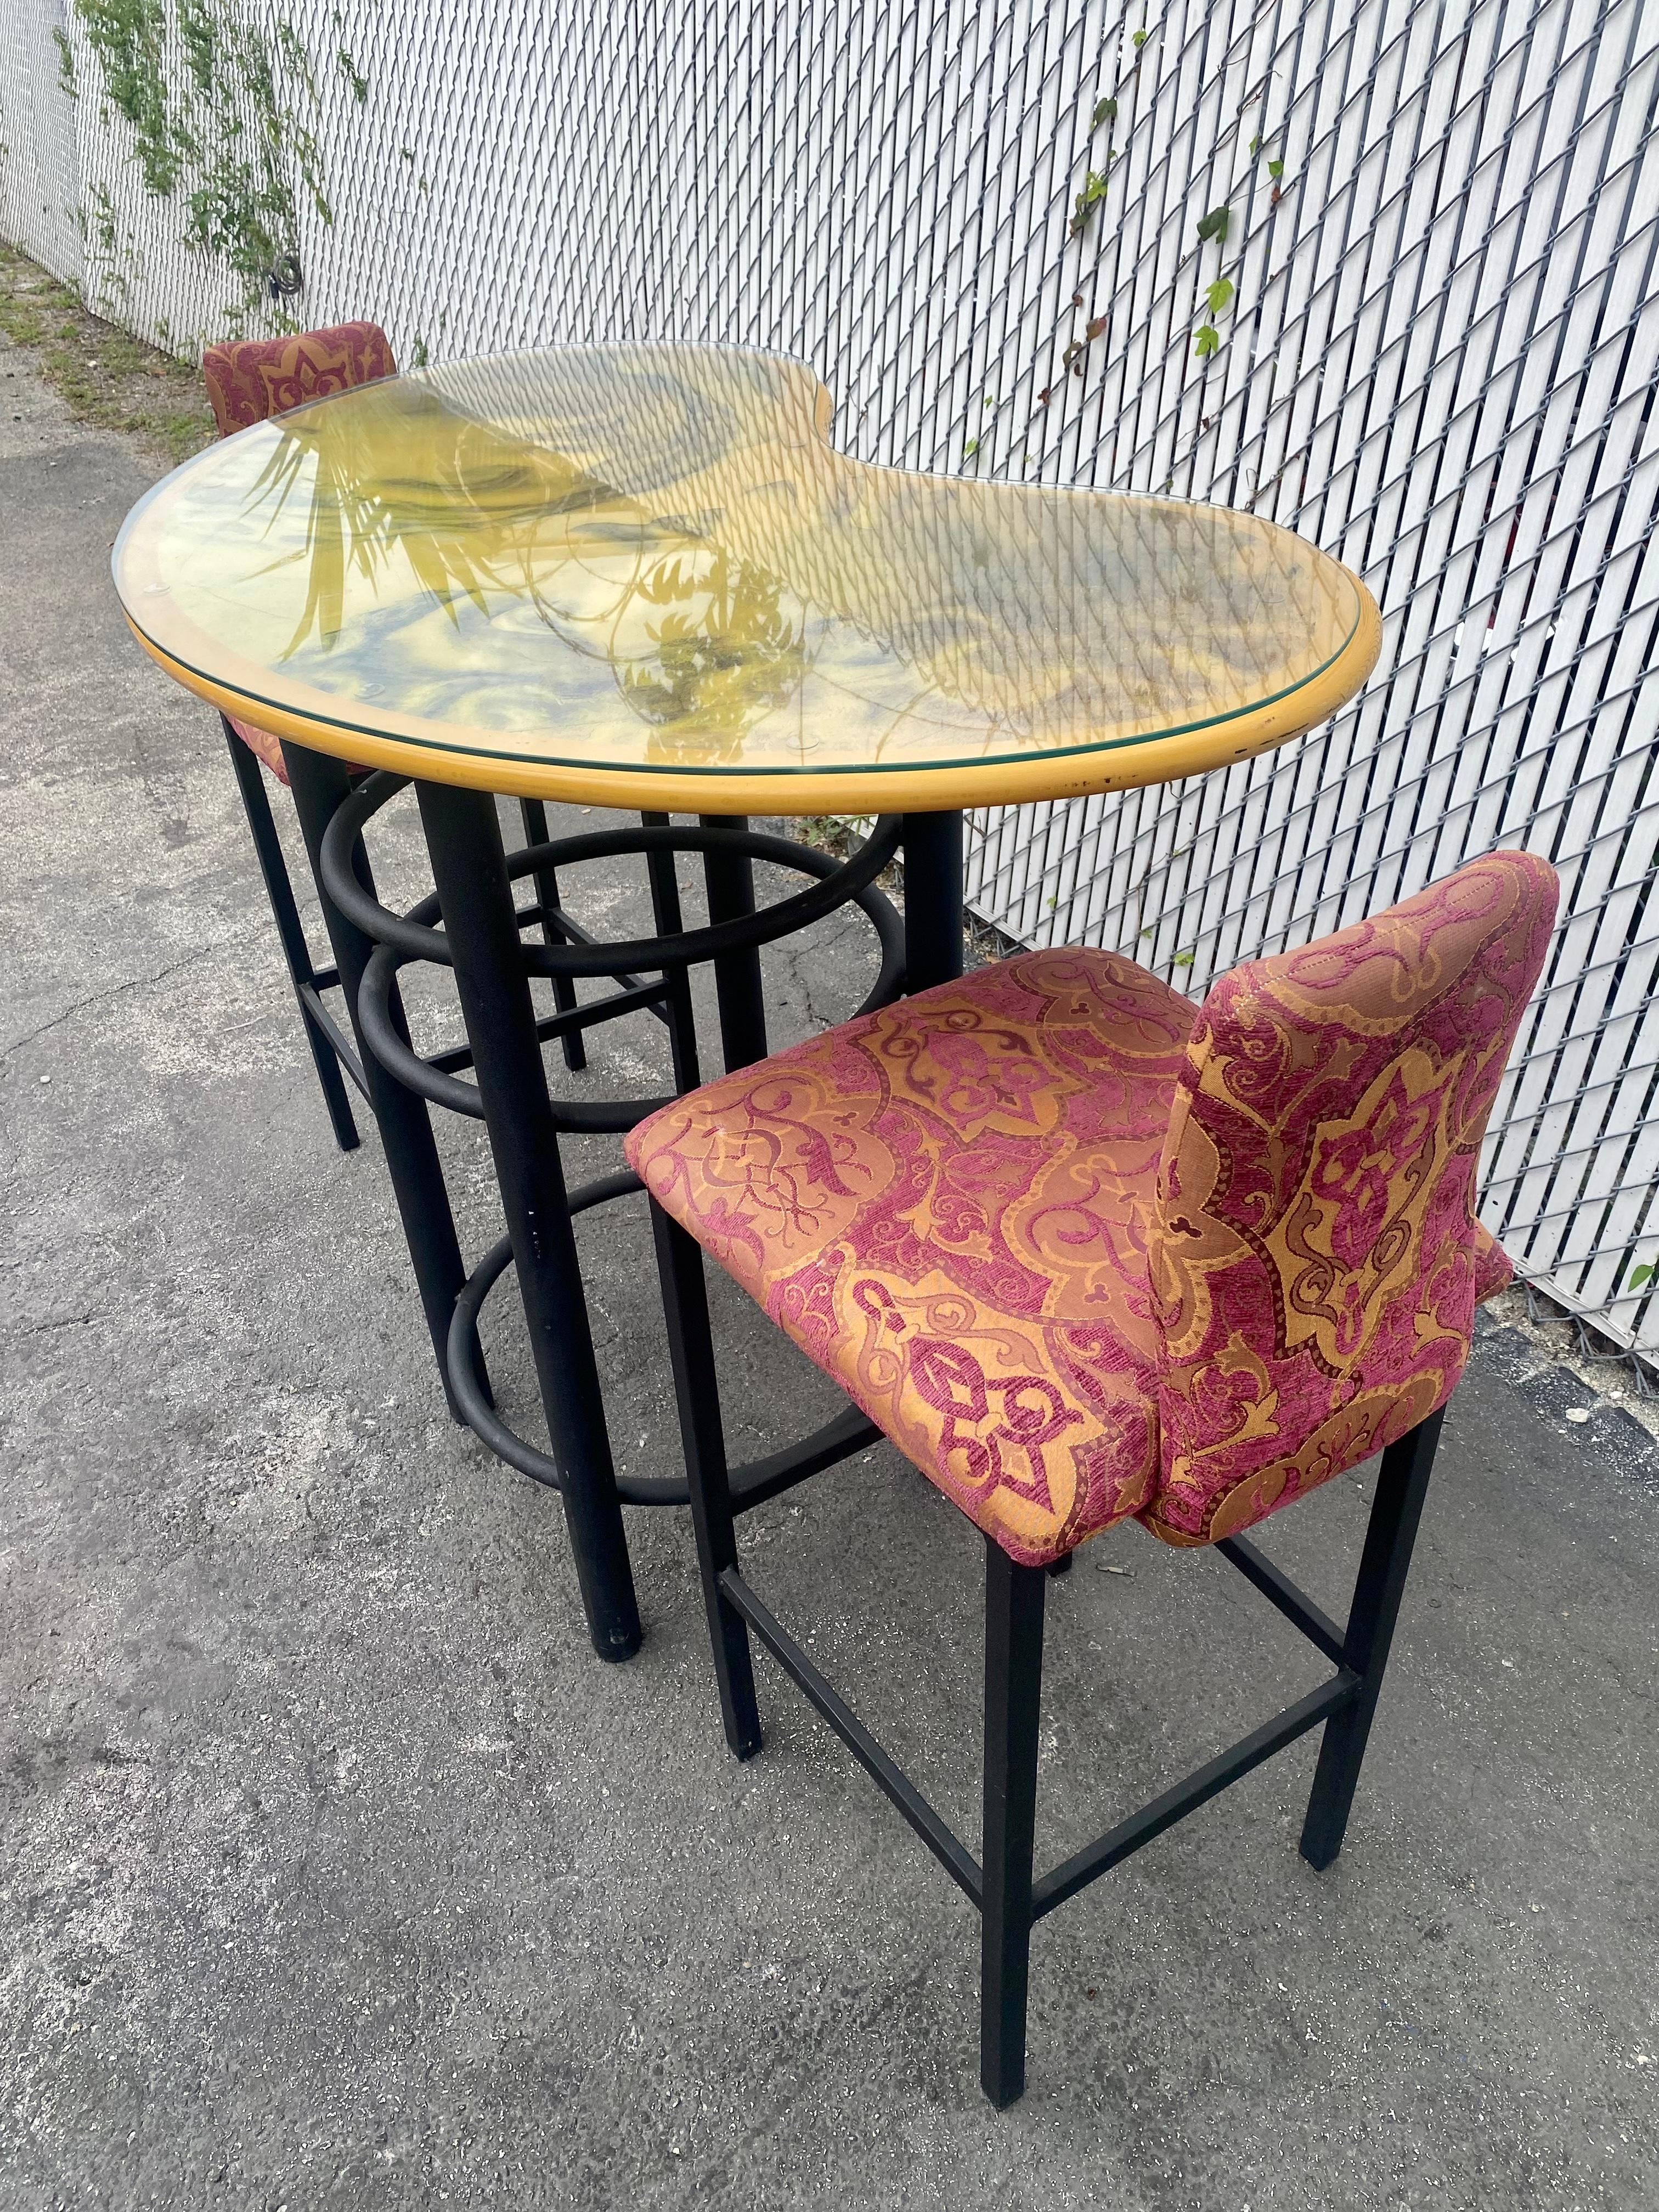 Upholstery 1980s Artistic Kidney Bar Pub Dining Table and Chairs, Set of 3 For Sale